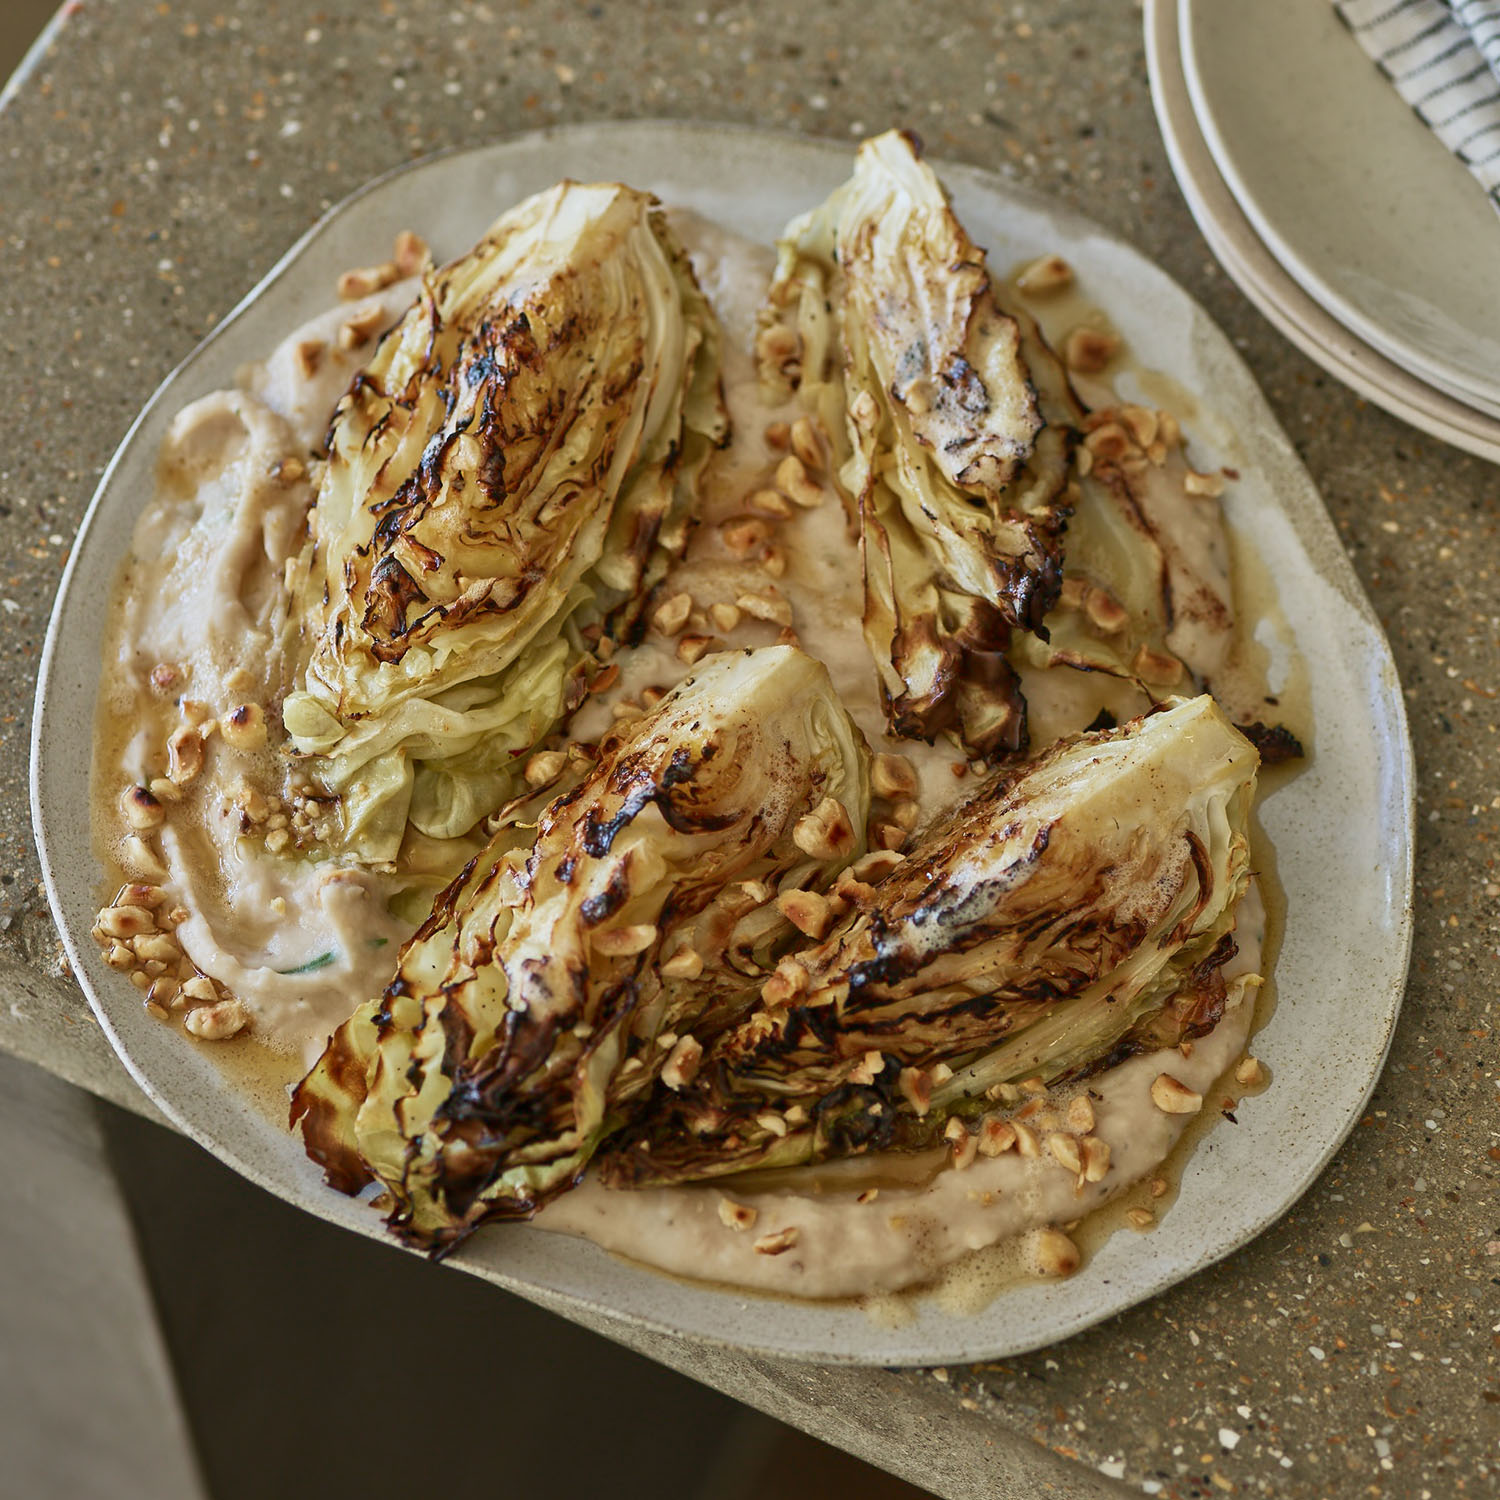 https://www.cuisinart.co.uk/on/demandware.static/-/Sites-uk-cuisinart-Library/default/dw72aaa800/images/recipes/Hispi-Cabbage.jpg